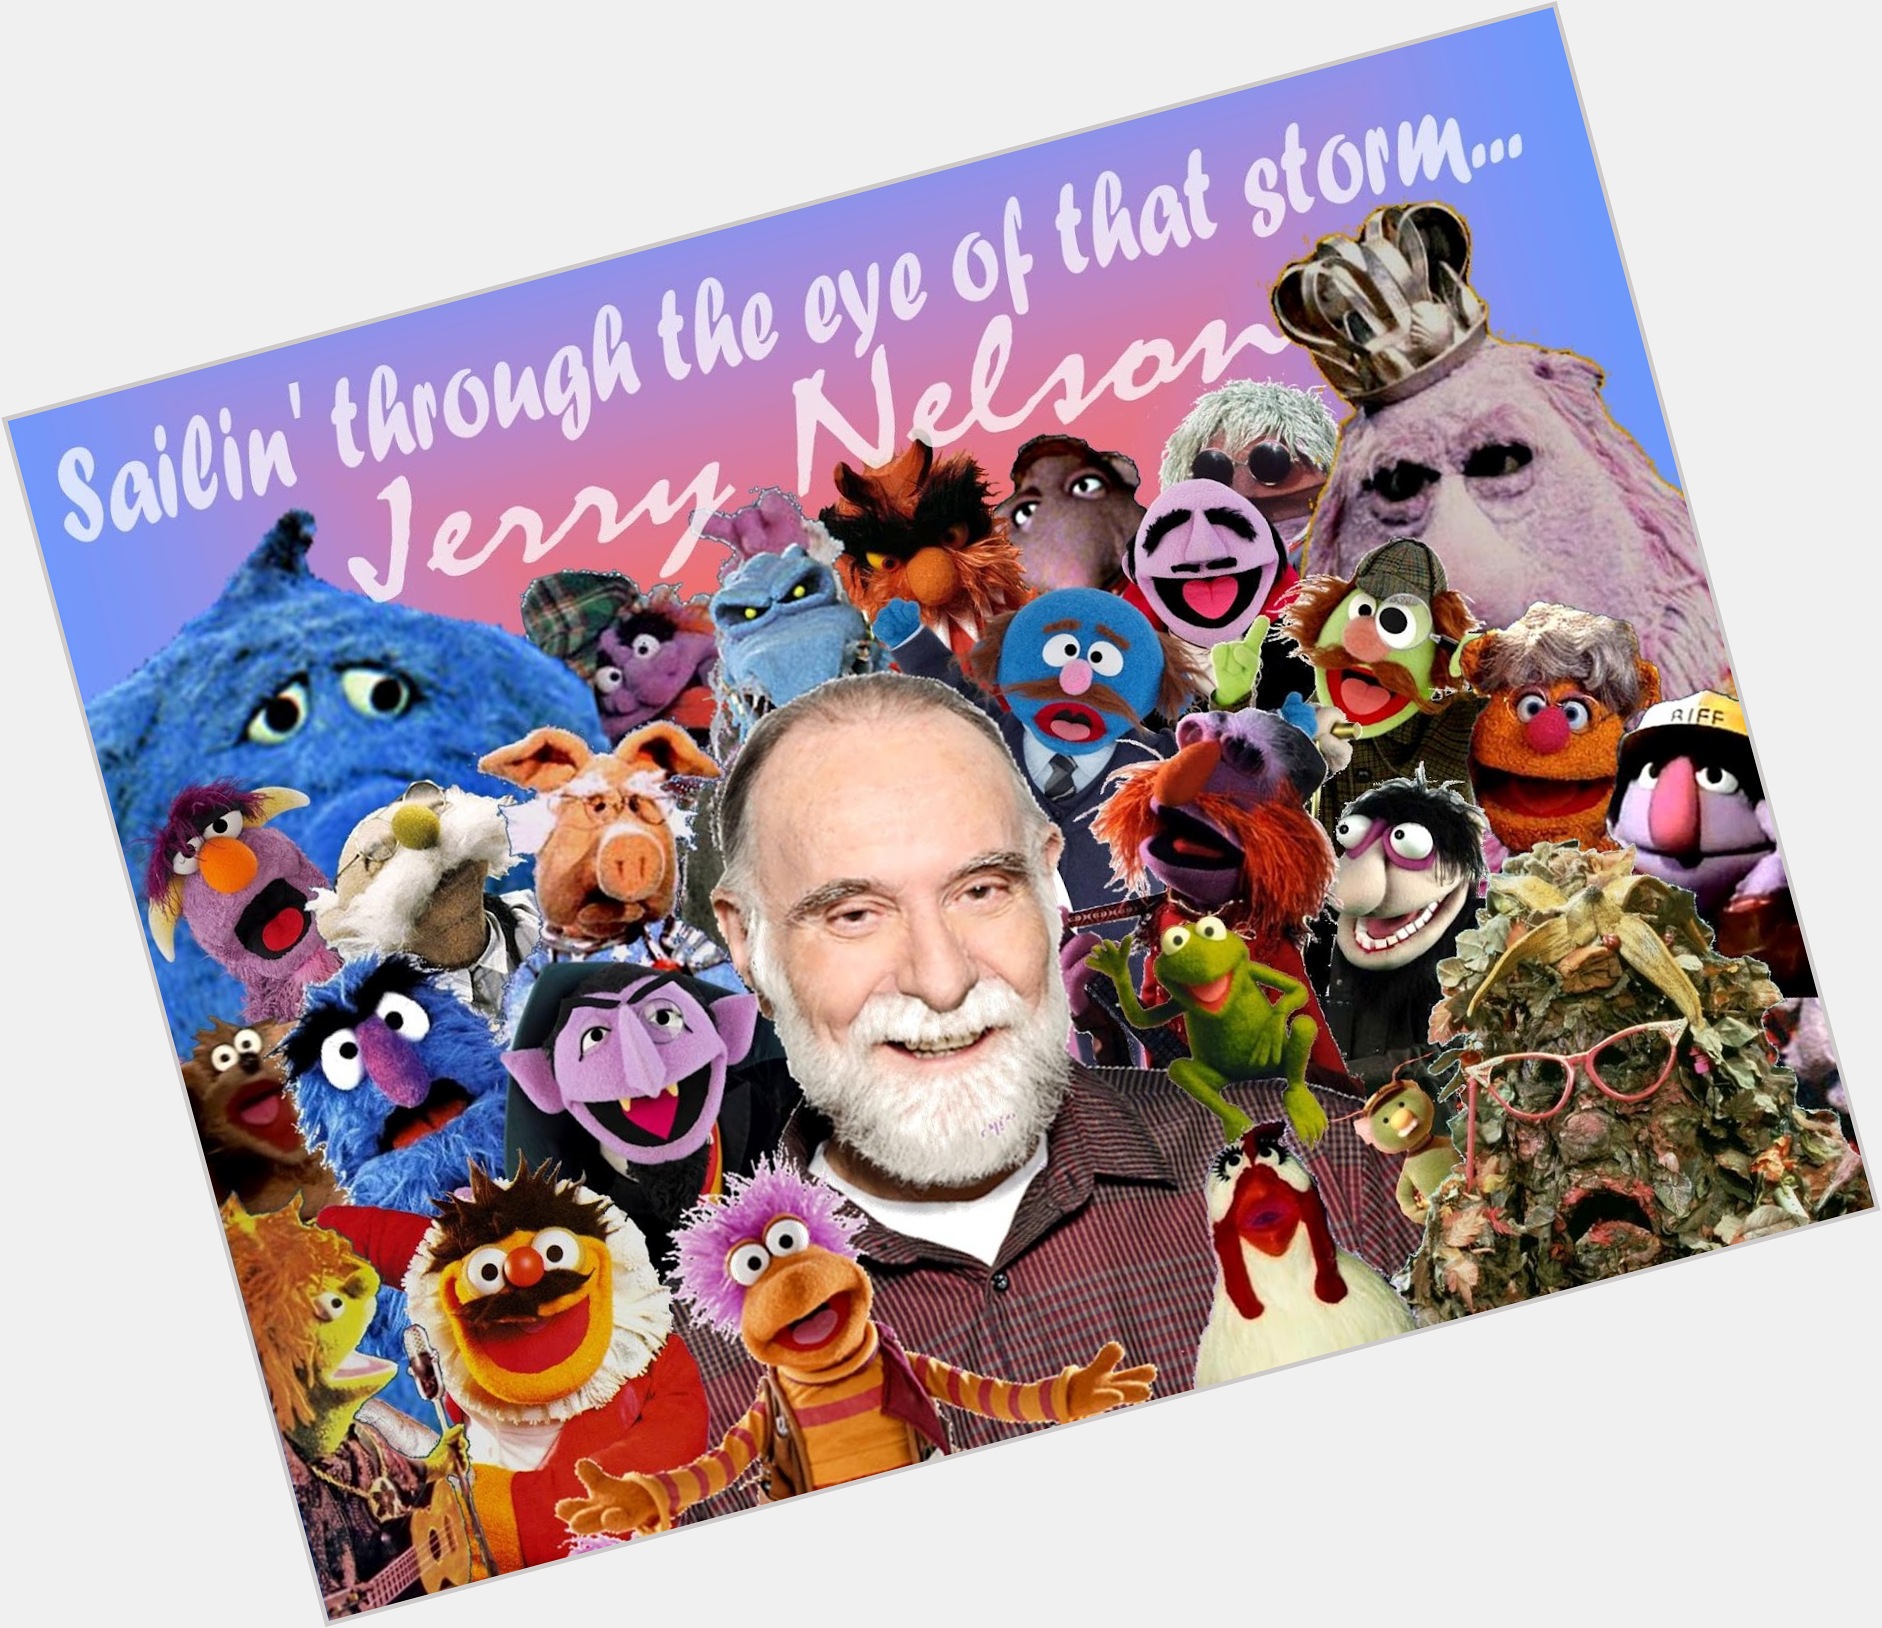 Jerry Nelson Average body,  bald hair & hairstyles